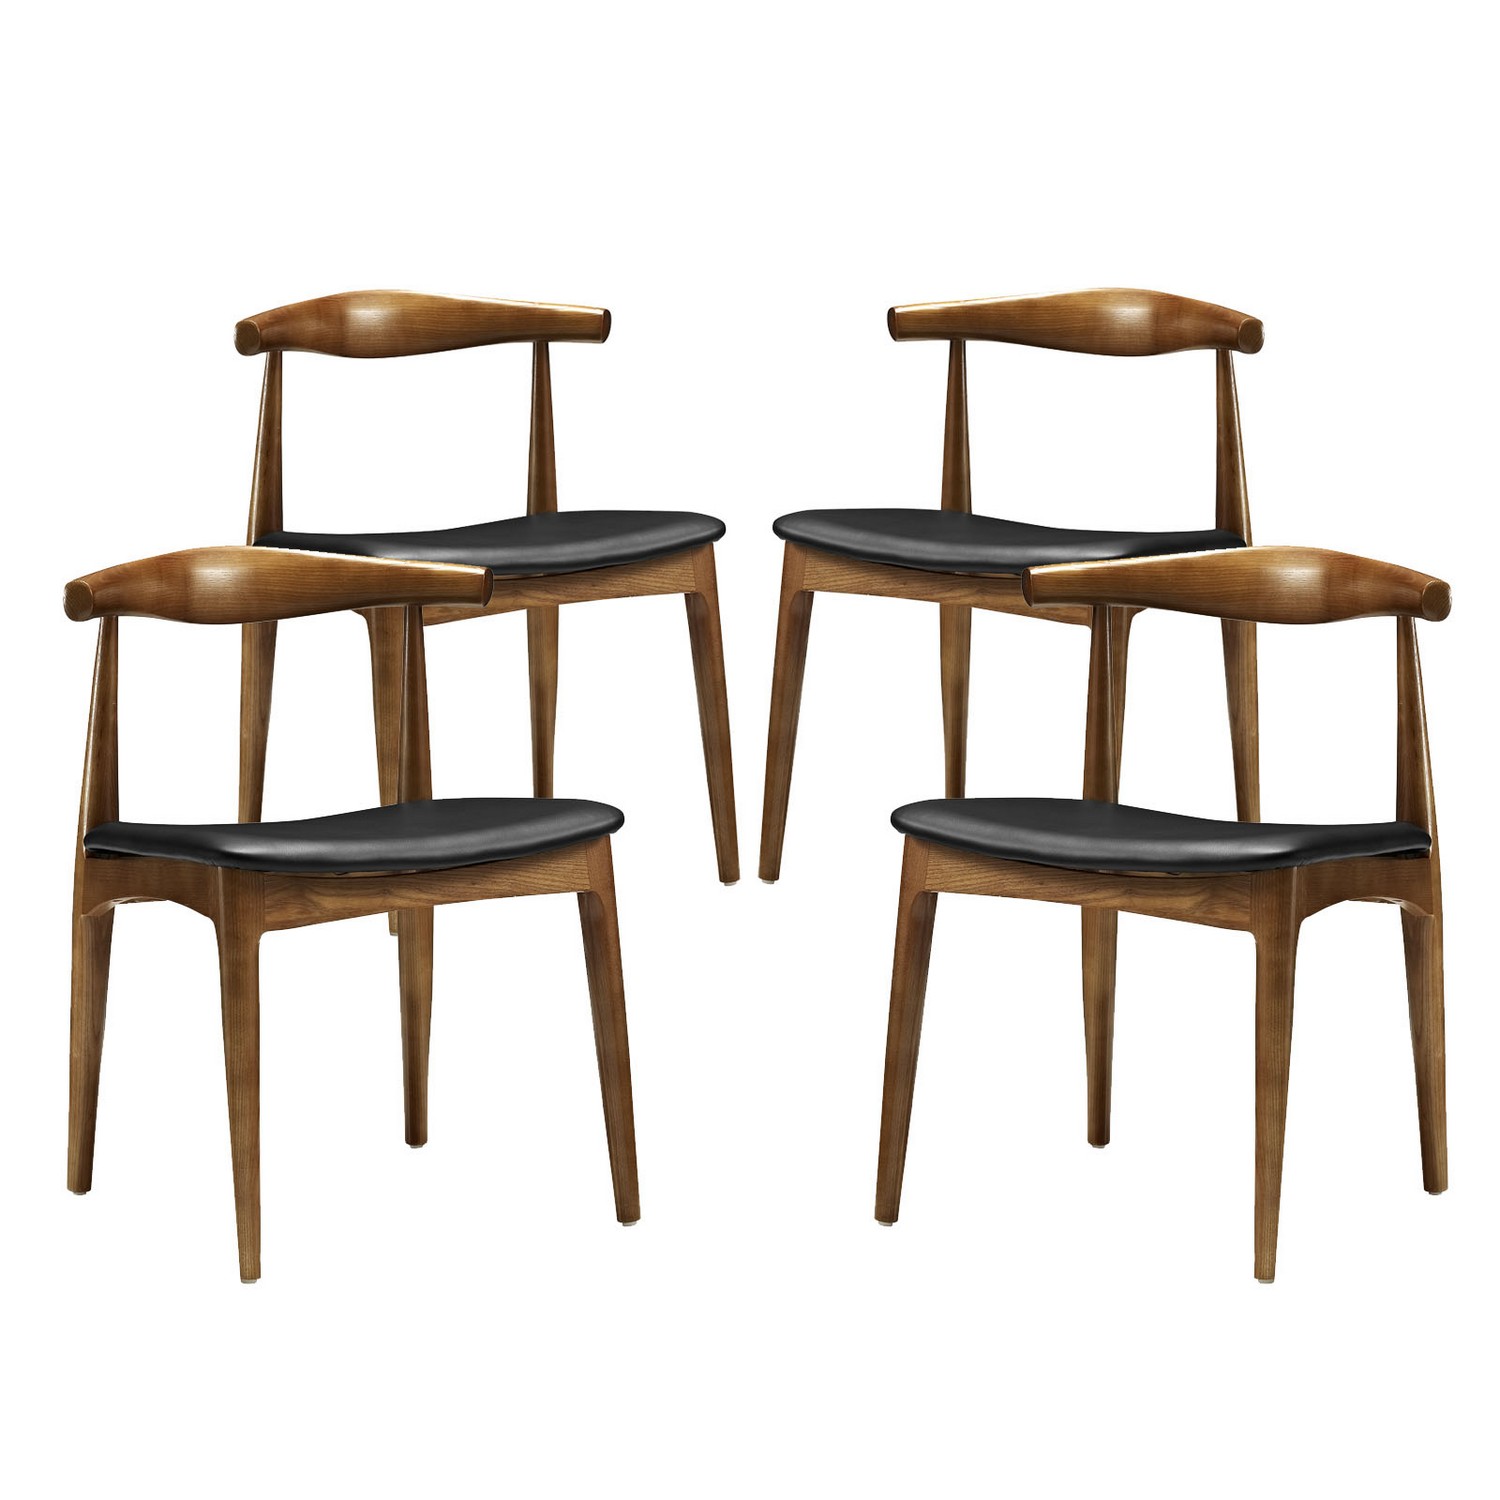 Modway Tracy Dining Chairs Set of 4 - Black